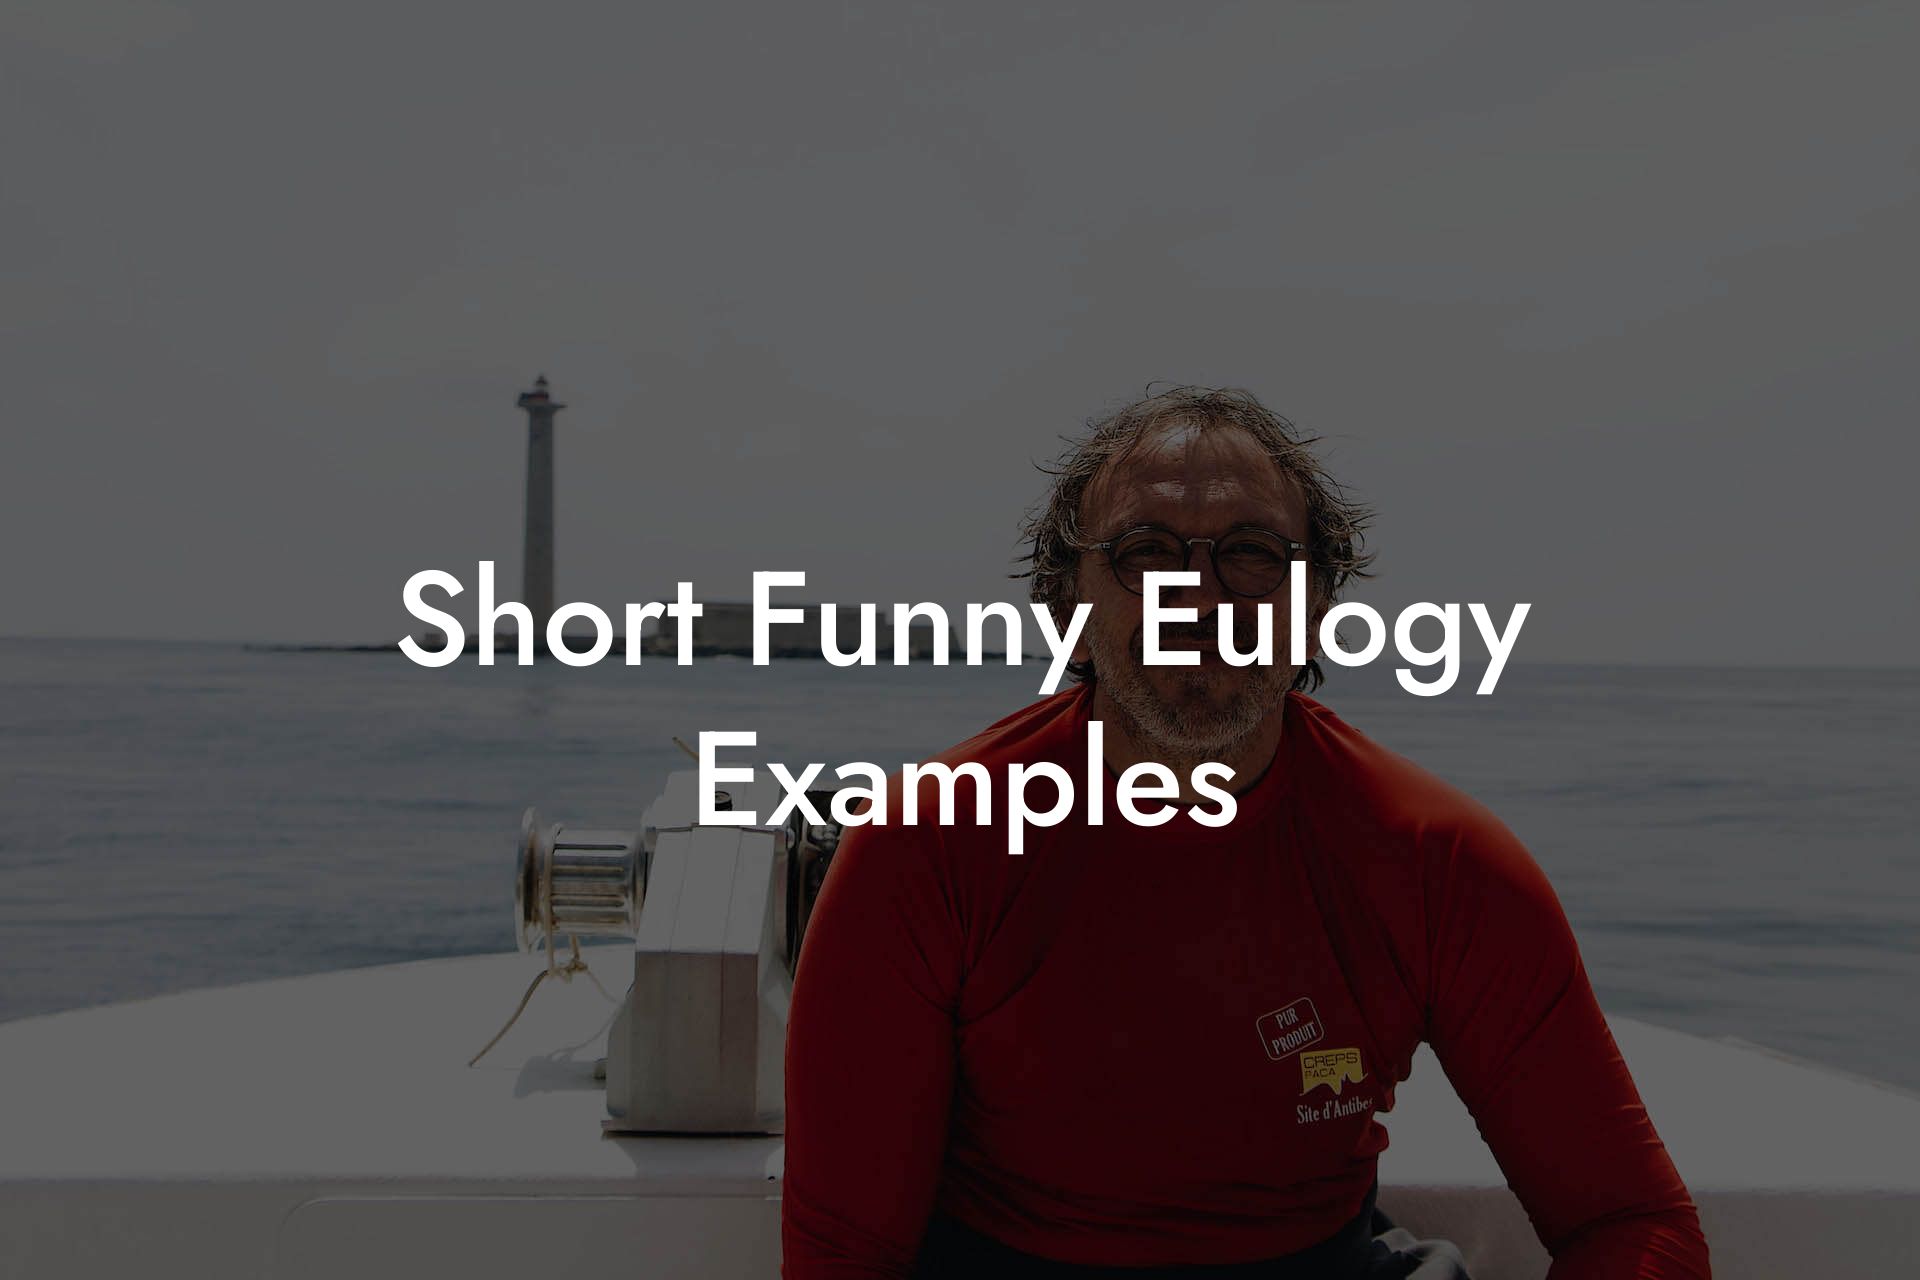 Short Funny Eulogy Examples